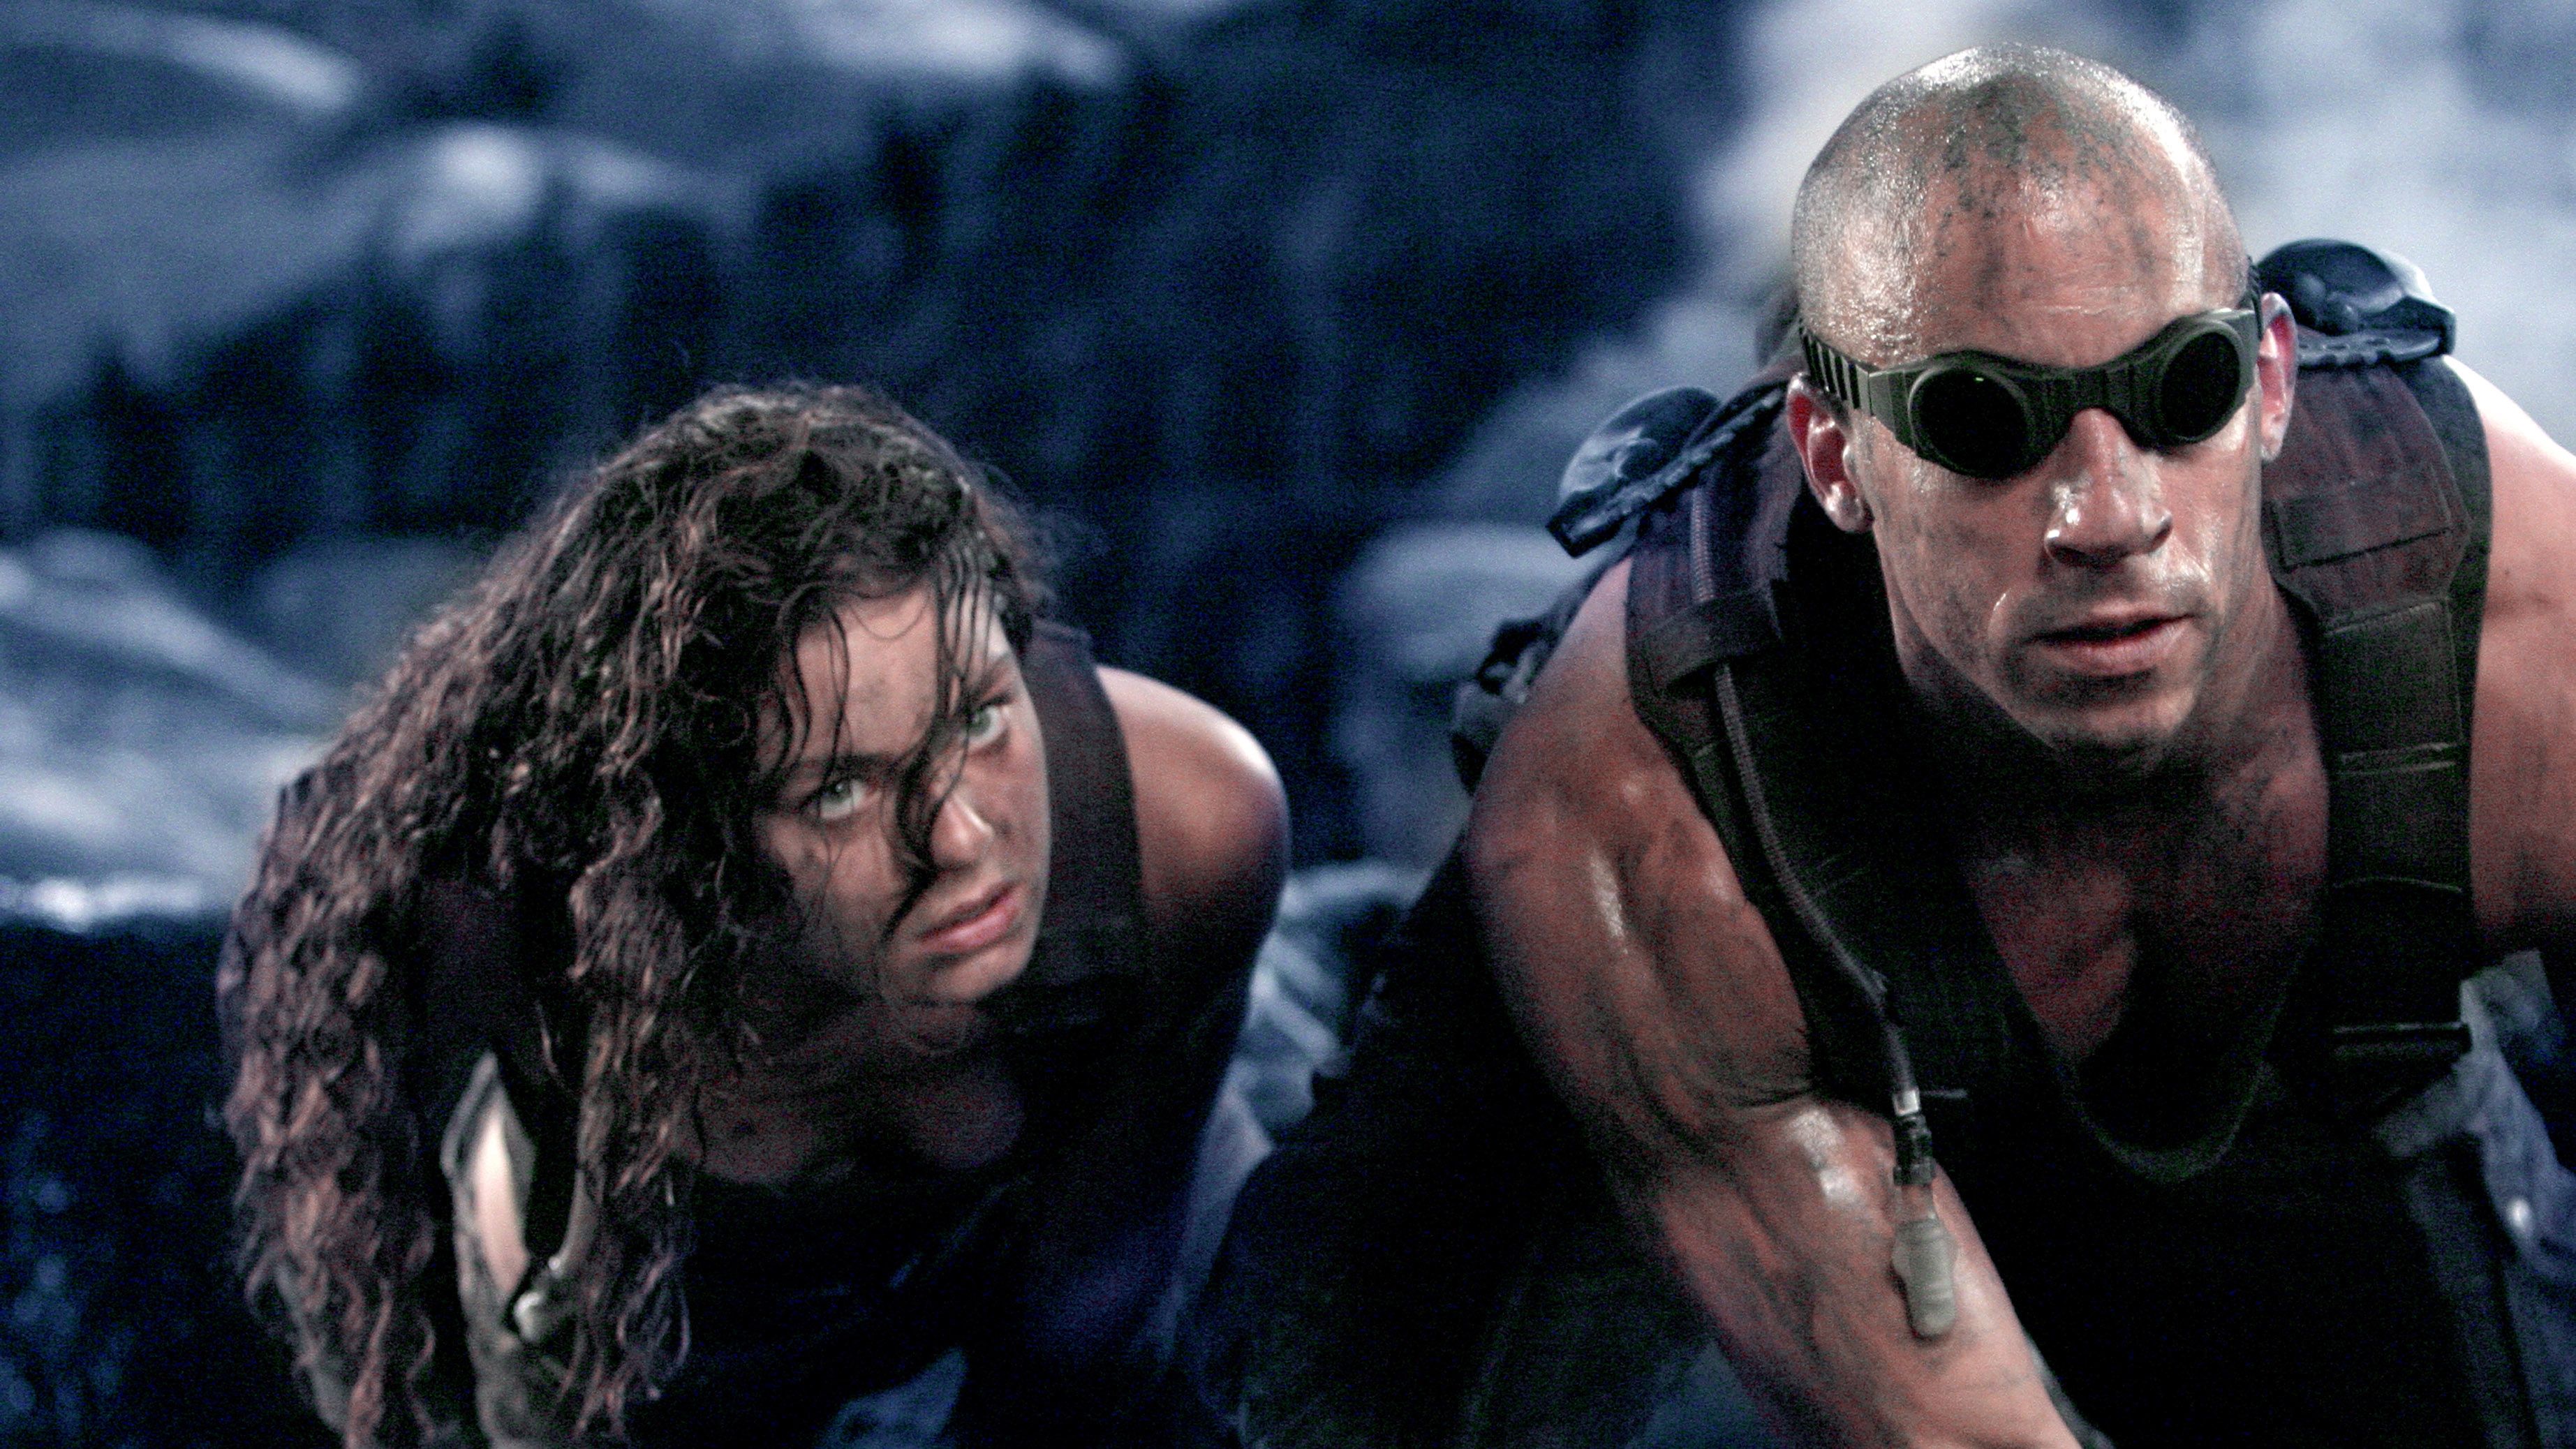 movie, the chronicles of riddick